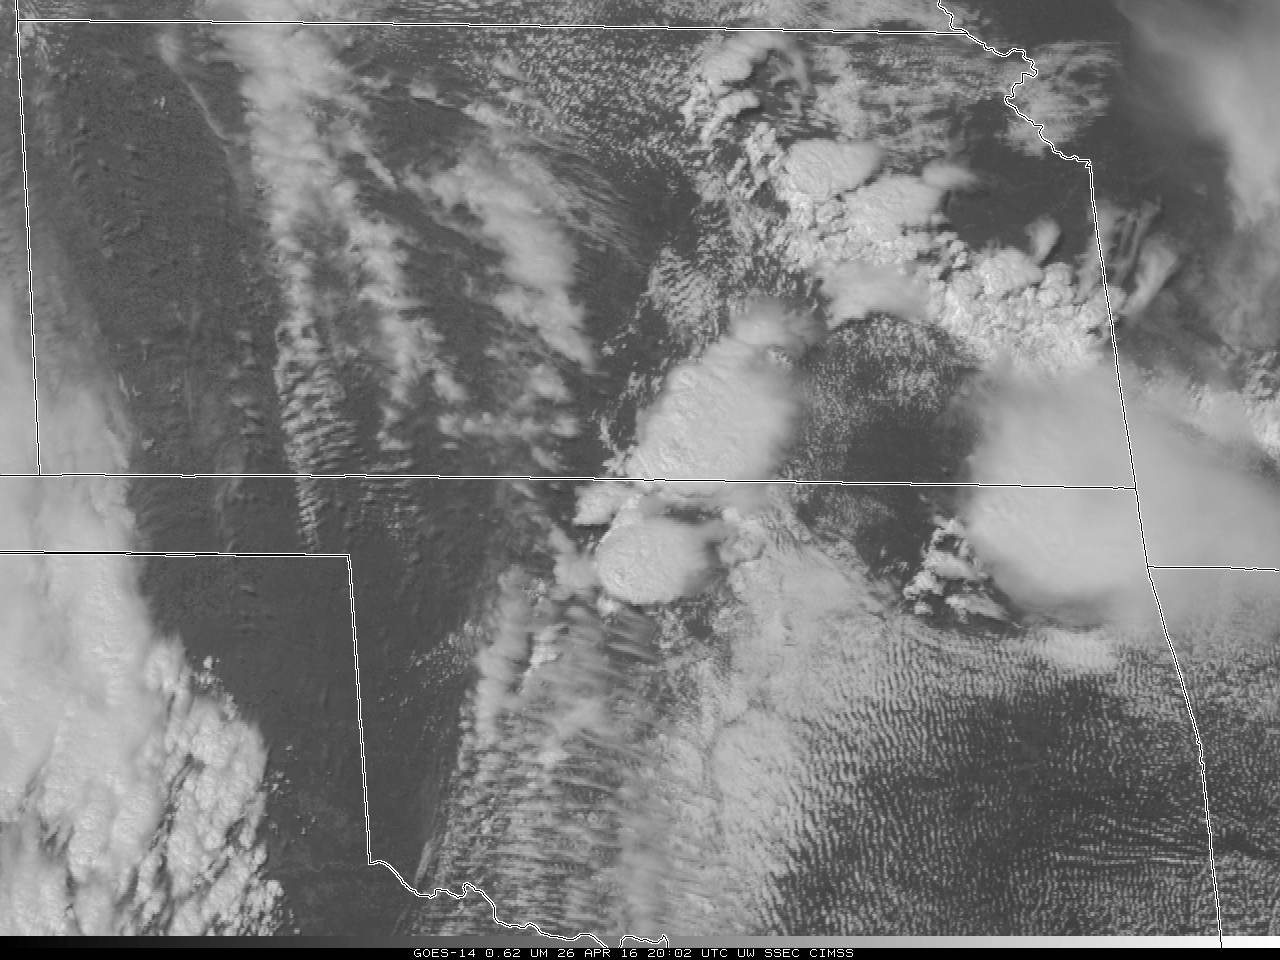 GOES-14 Visible (0.63 µm) Imagery, 26 April 2016. An orphan anvil is indicated by the Green Arrow at the start of the animation (click to play animation)